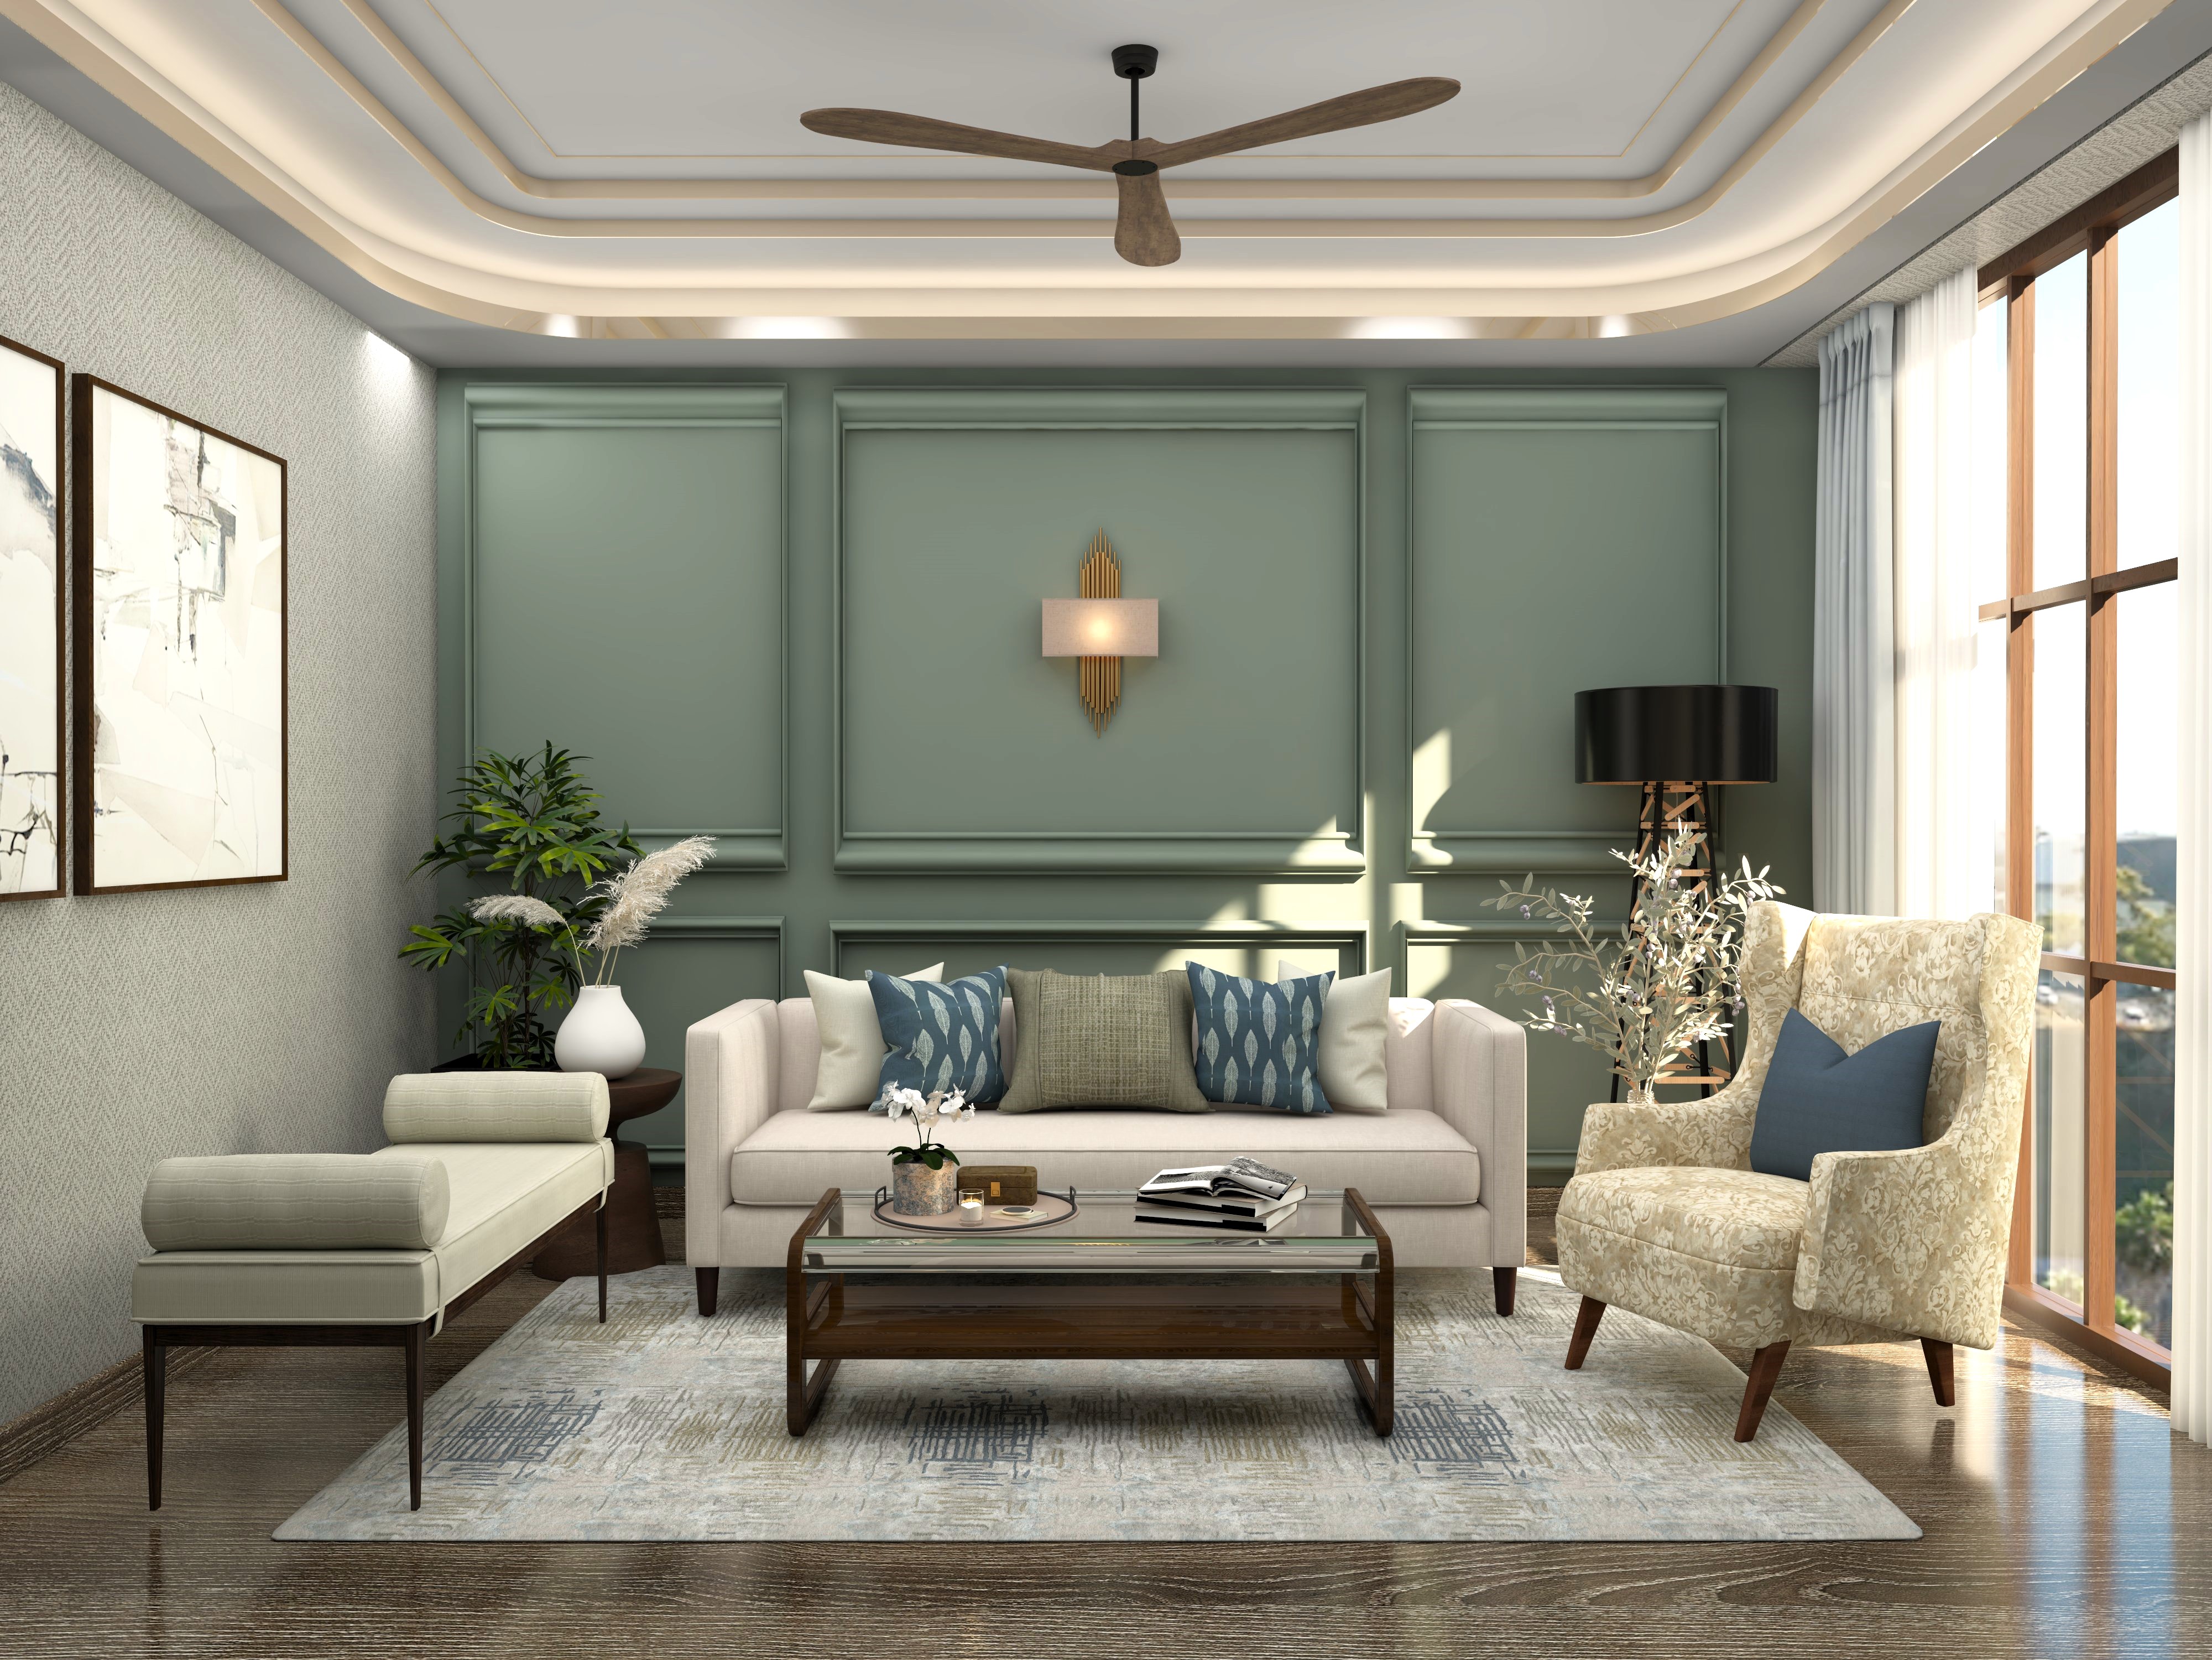 Living room with grey sofa and green wall mouldings-Beautiful Homes